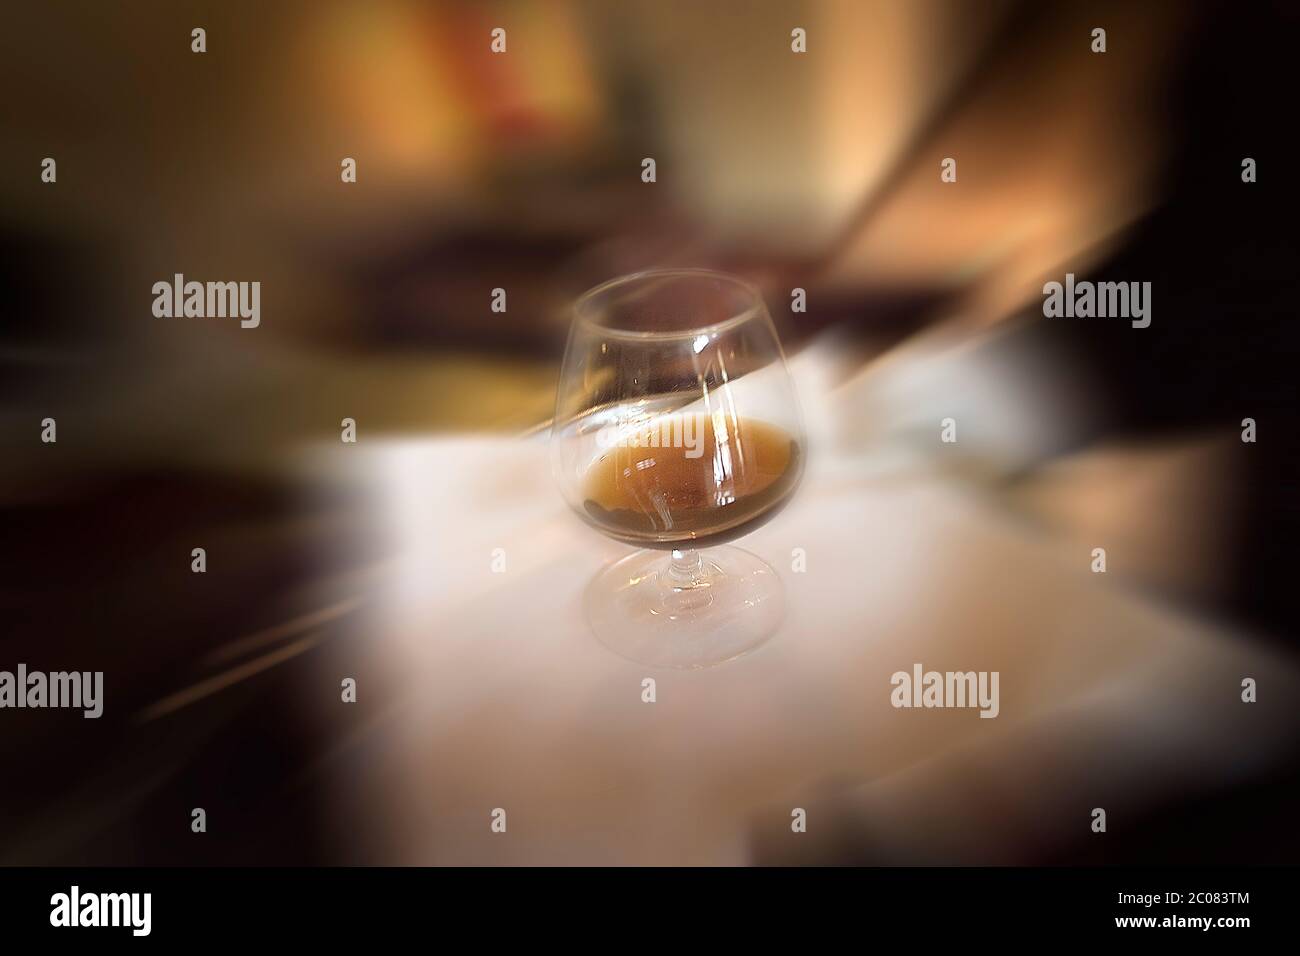 Waiter carrying brandy glass on tray with movement blur Stock Photo